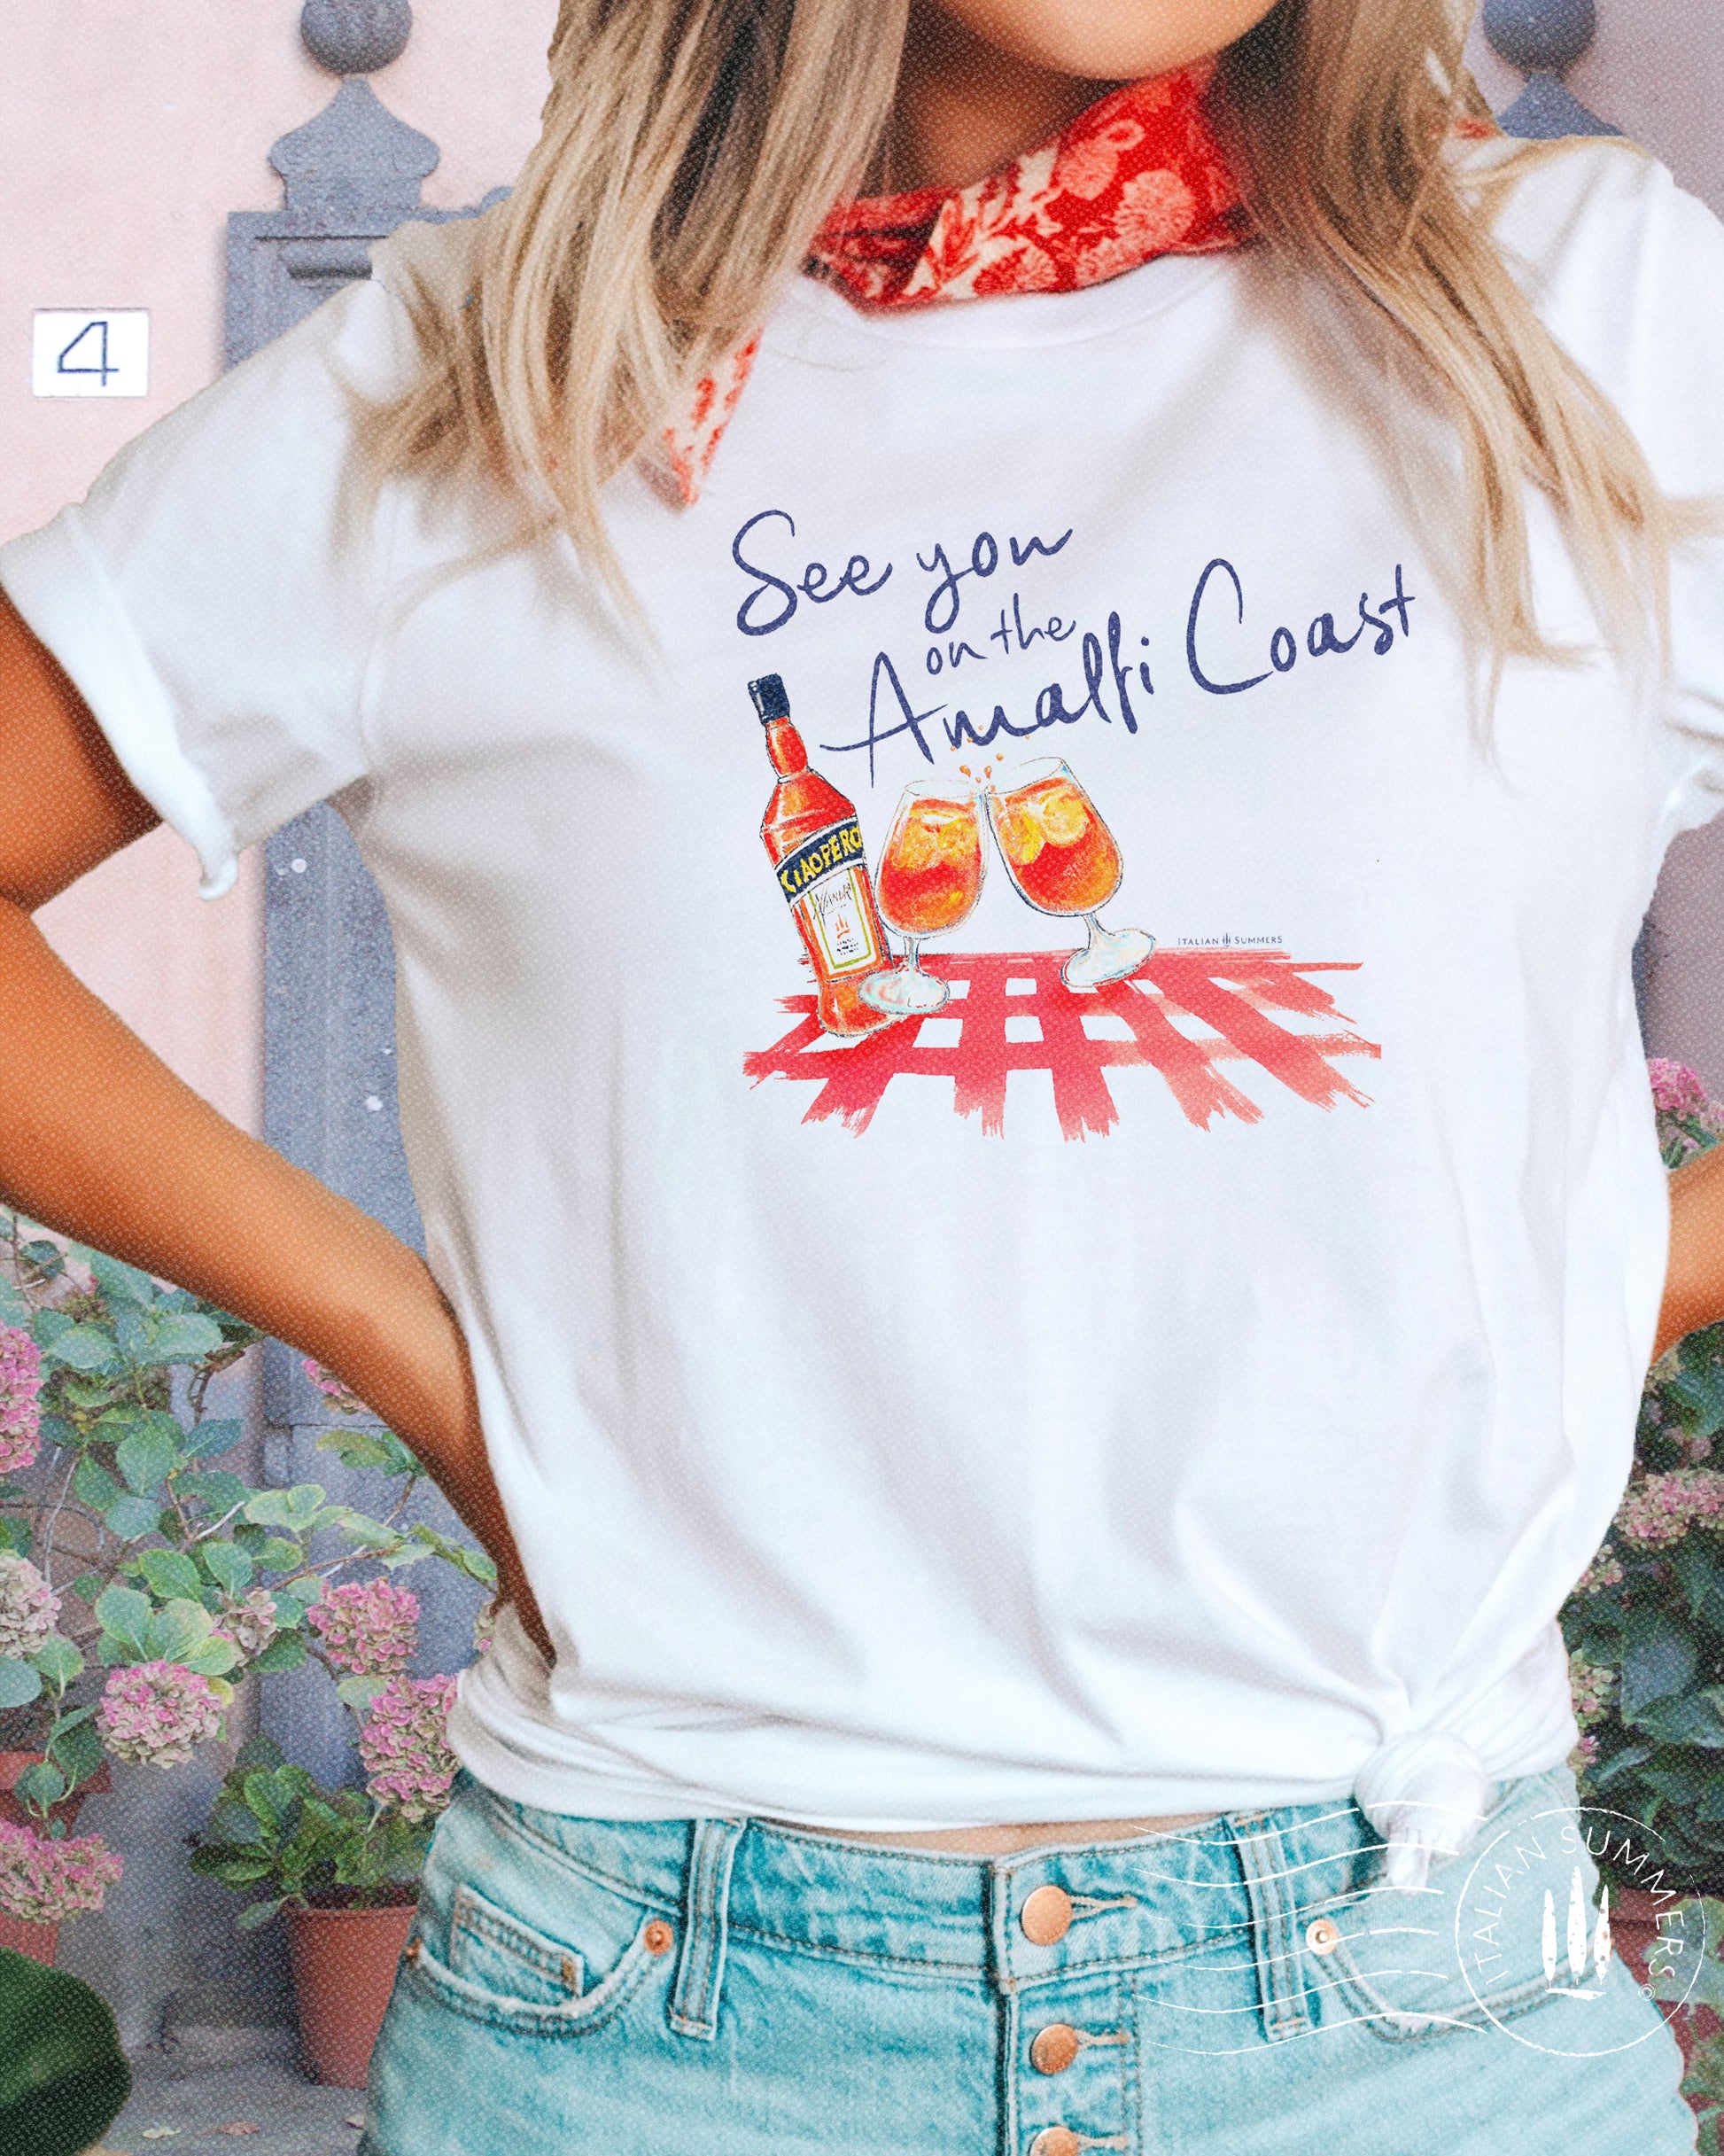 Italy inspired white t-shirt with the text See you on the Amalfi Coast in navy blue and a sketch in water color with an Aperol bottle and 2 glassis filled with Aperol Spritz on a bright red table cloth.